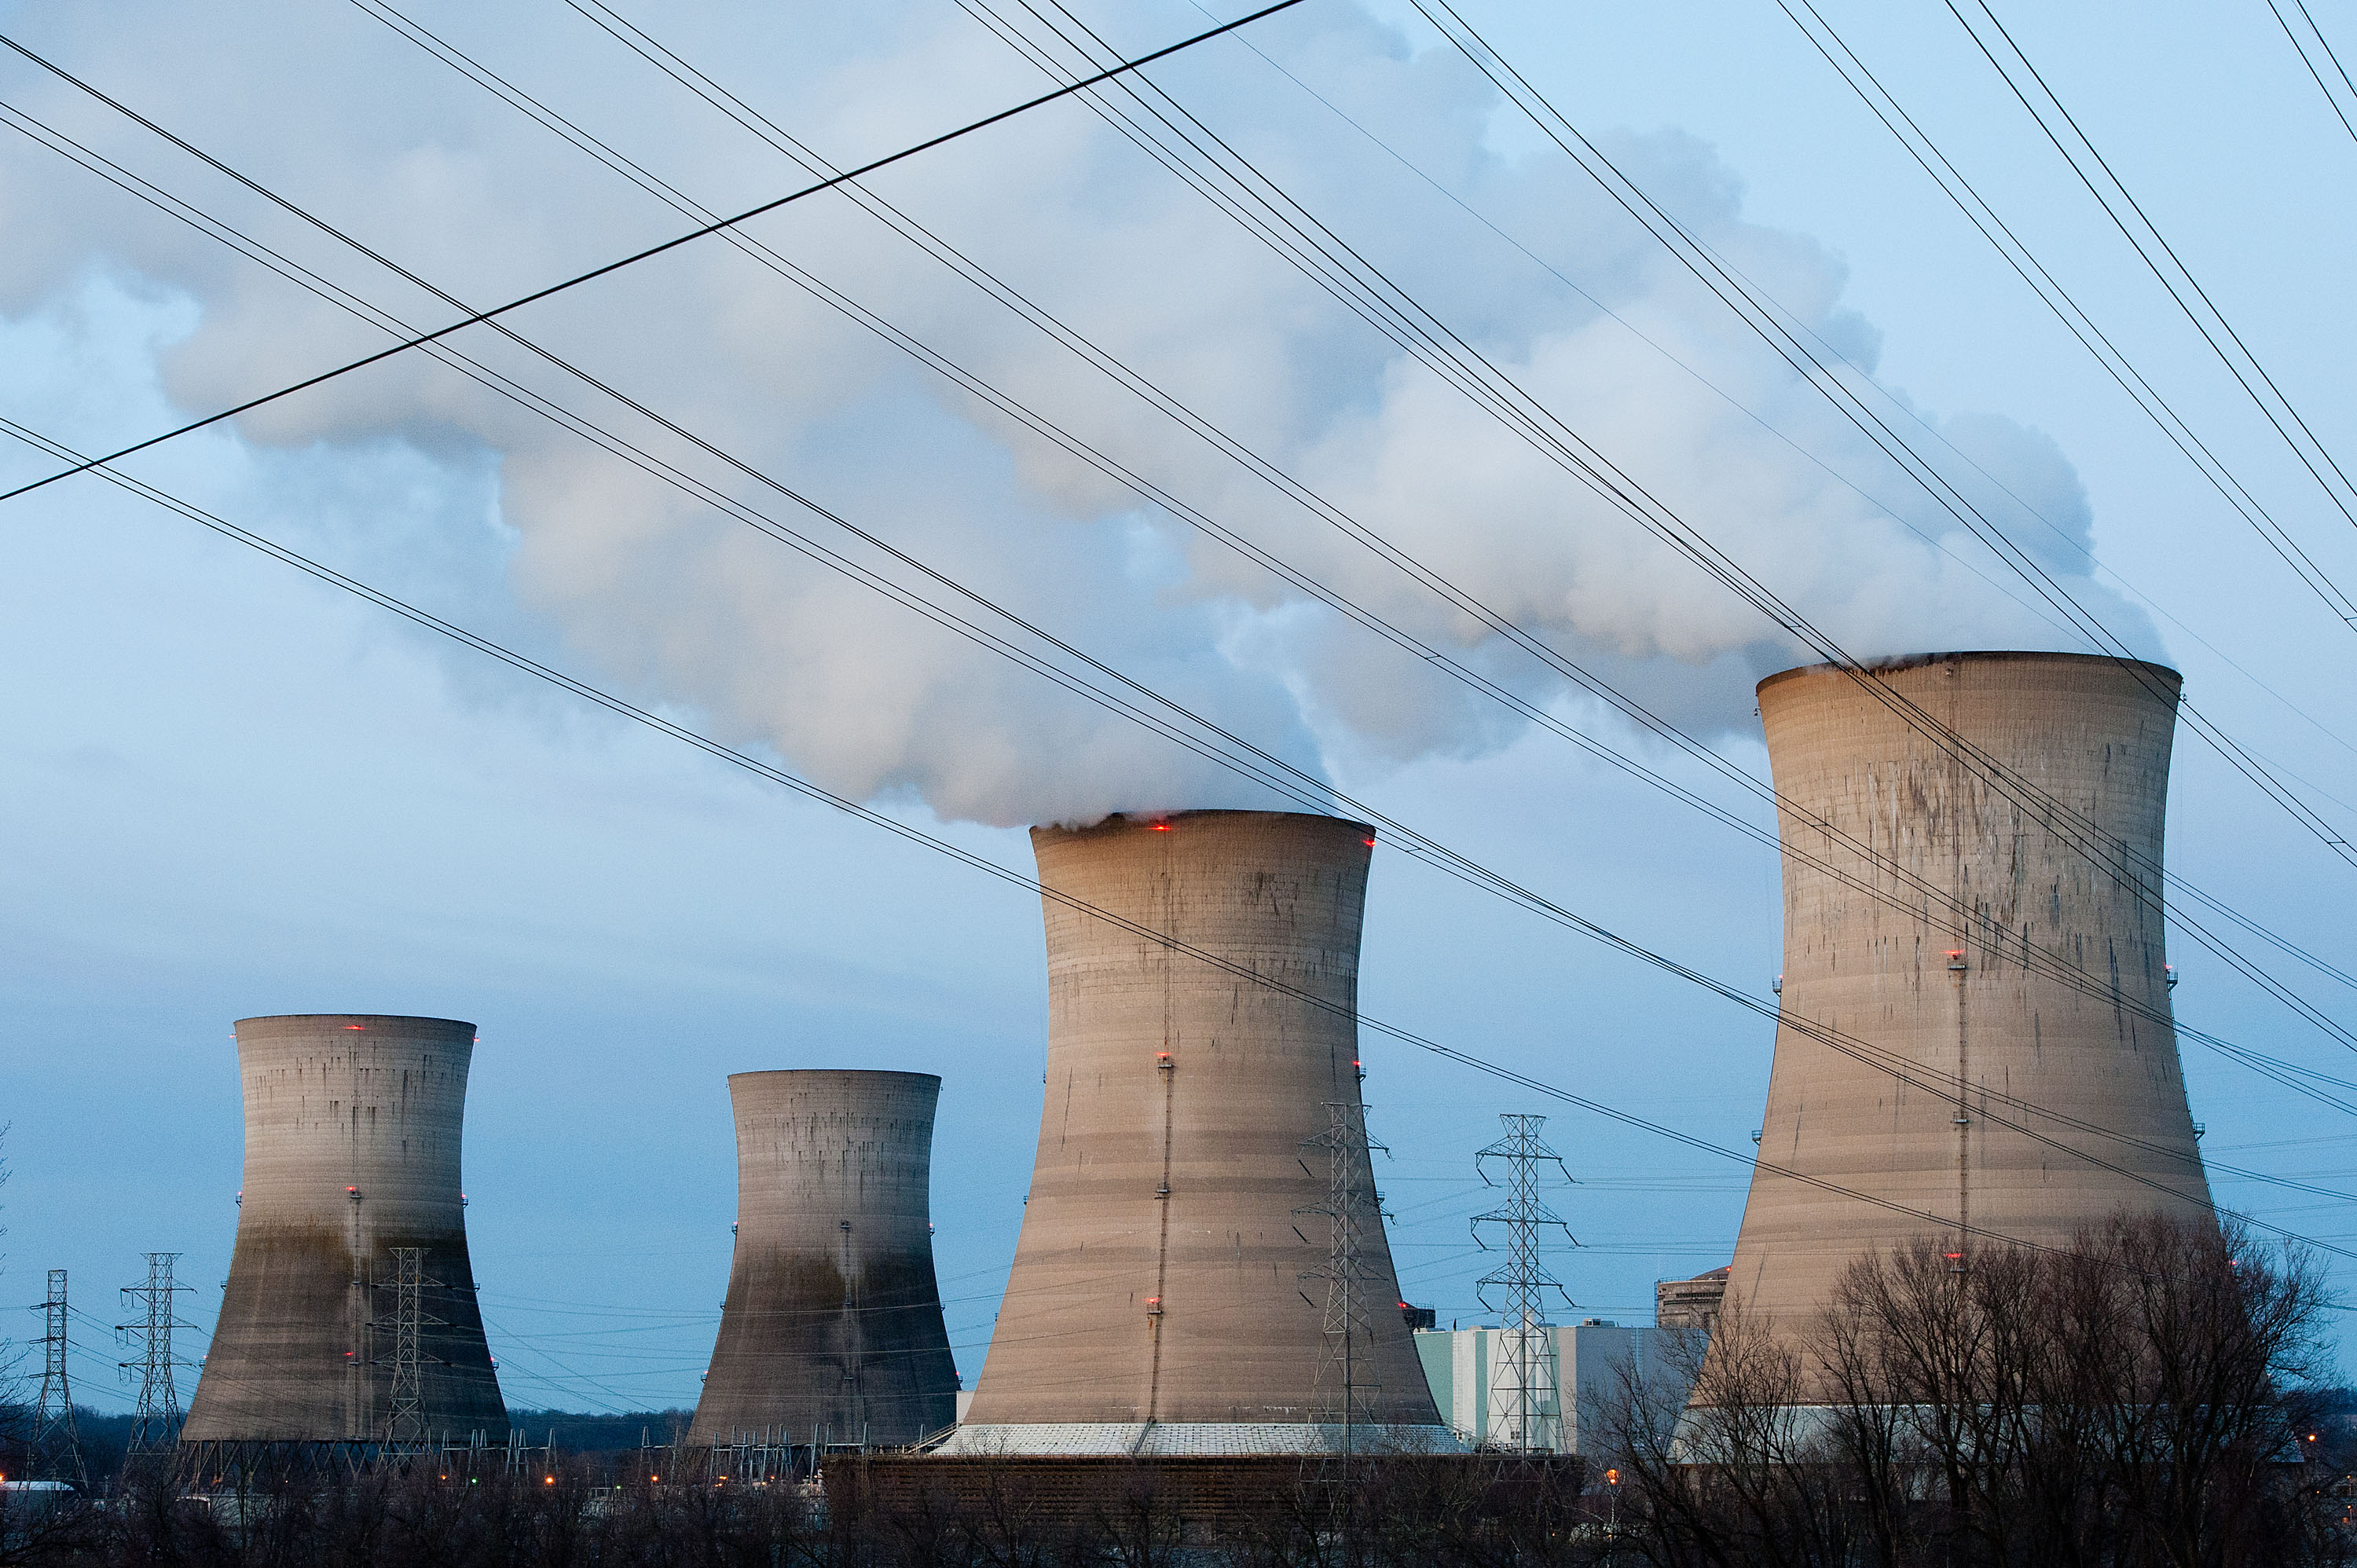 The Three Mile Island Nuclear Plant is seen in the early morning hours March 28, 2011 in Middletown, Pa. (Jeff Fusco&mdash;Getty Images)